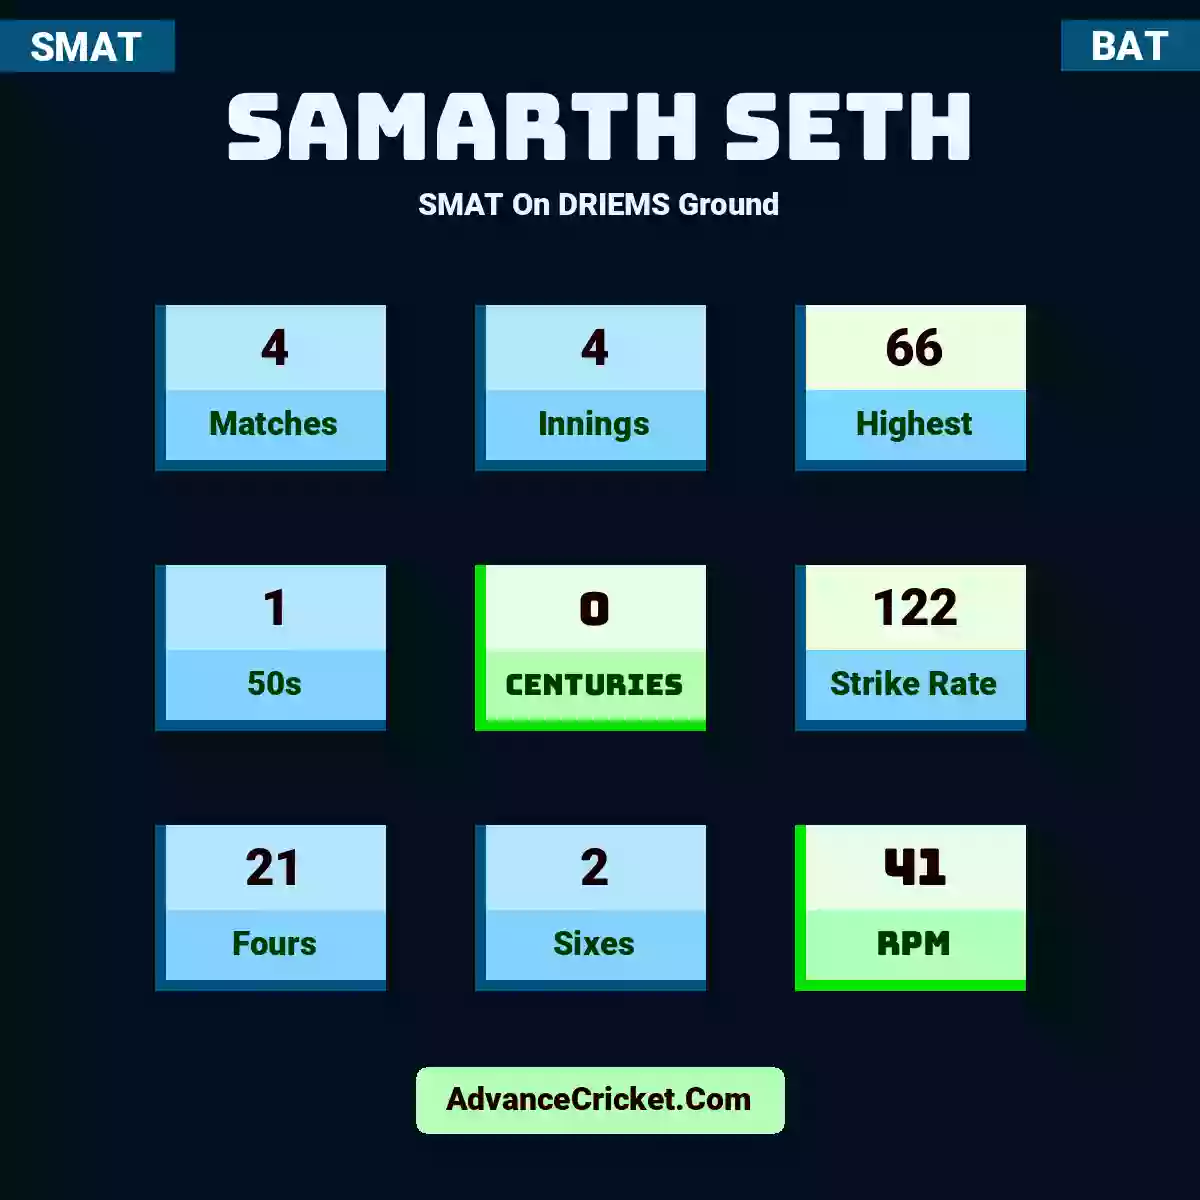 Samarth Seth SMAT  On DRIEMS Ground, Samarth Seth played 4 matches, scored 66 runs as highest, 1 half-centuries, and 0 centuries, with a strike rate of 122. S.Seth hit 21 fours and 2 sixes, with an RPM of 41.